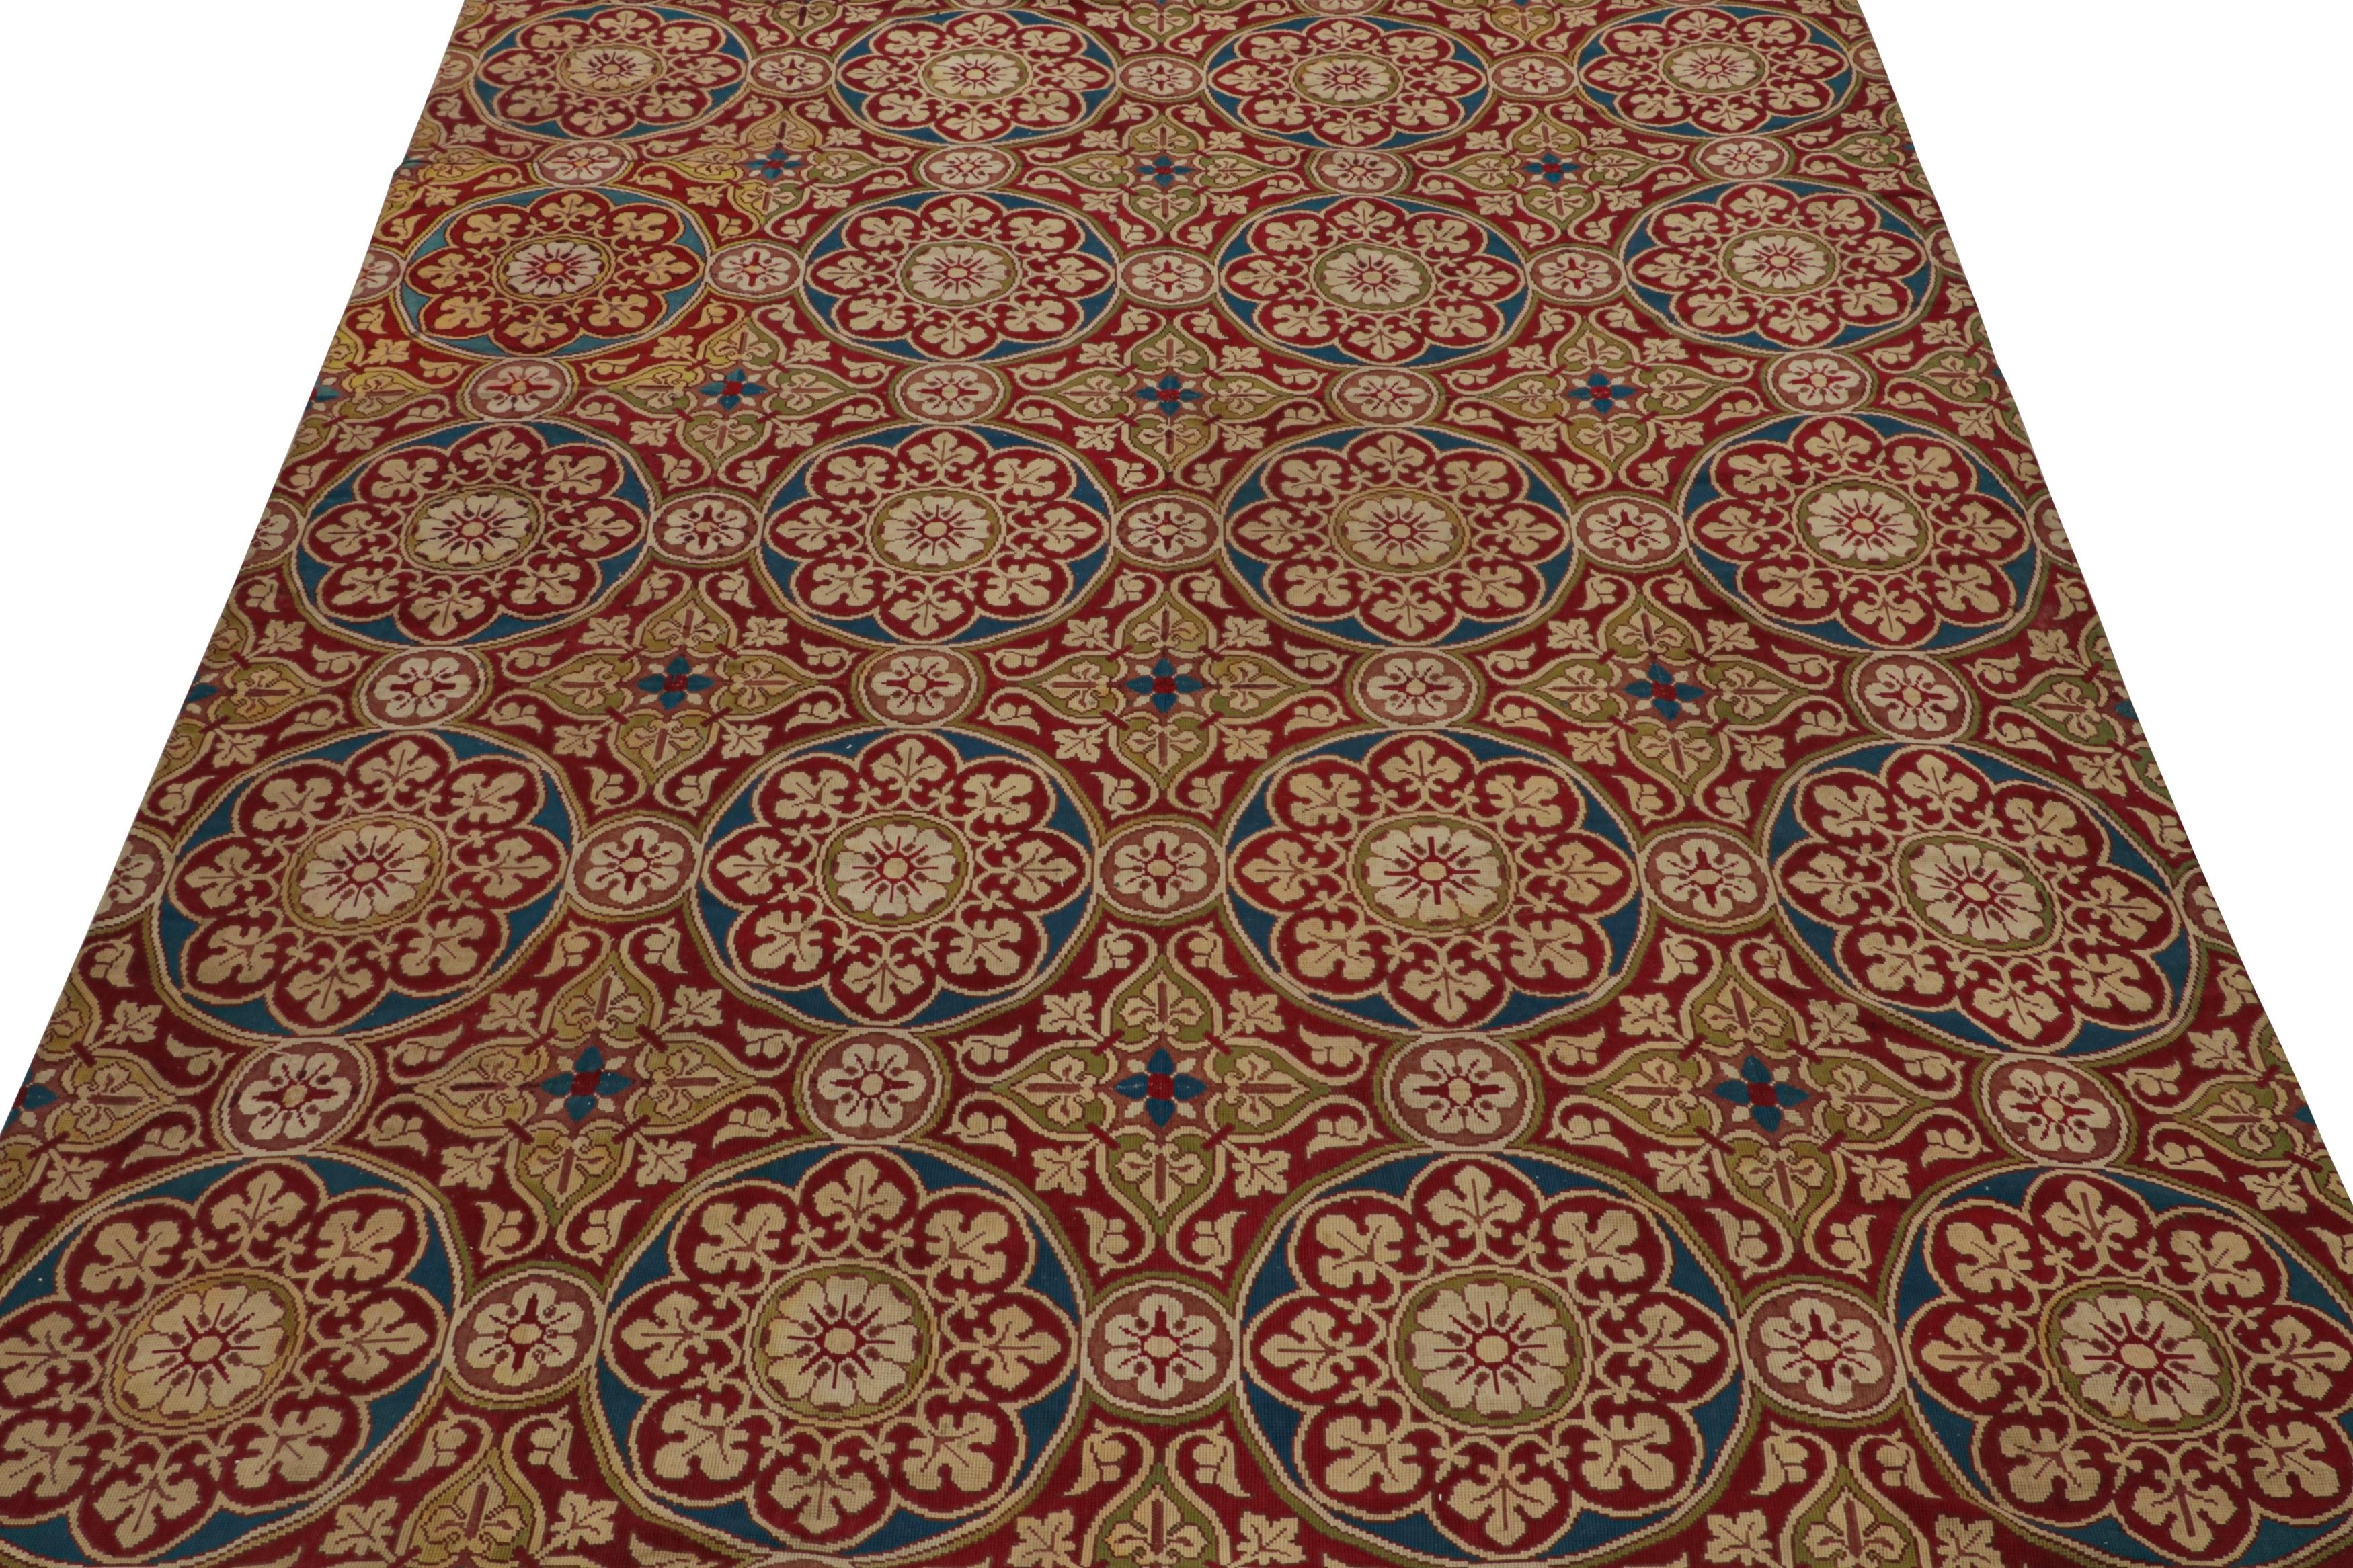 Hand-Woven Antique French Needlepoint Rug in Red with Medallions, from Rug & Kilim For Sale